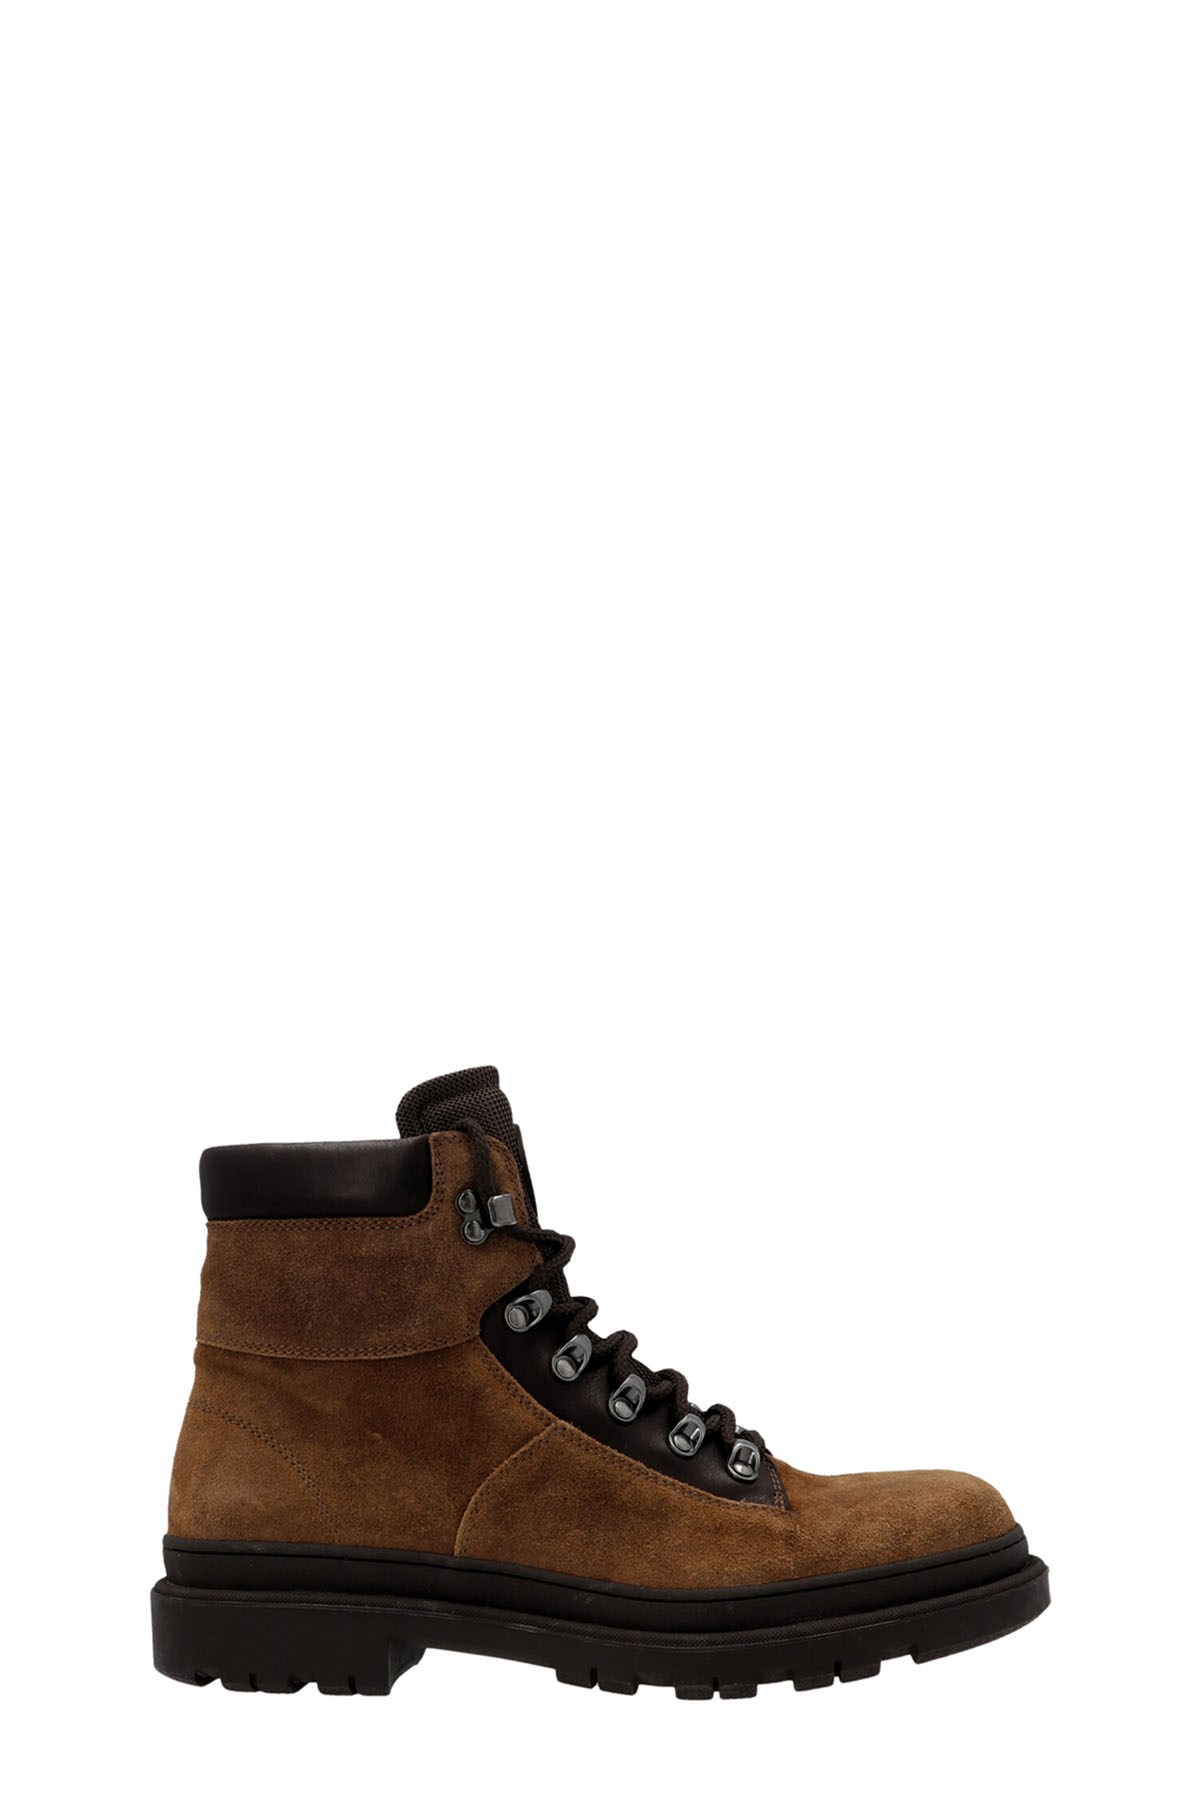 BRUNELLO CUCINELLI Suede Lace-Up Boots